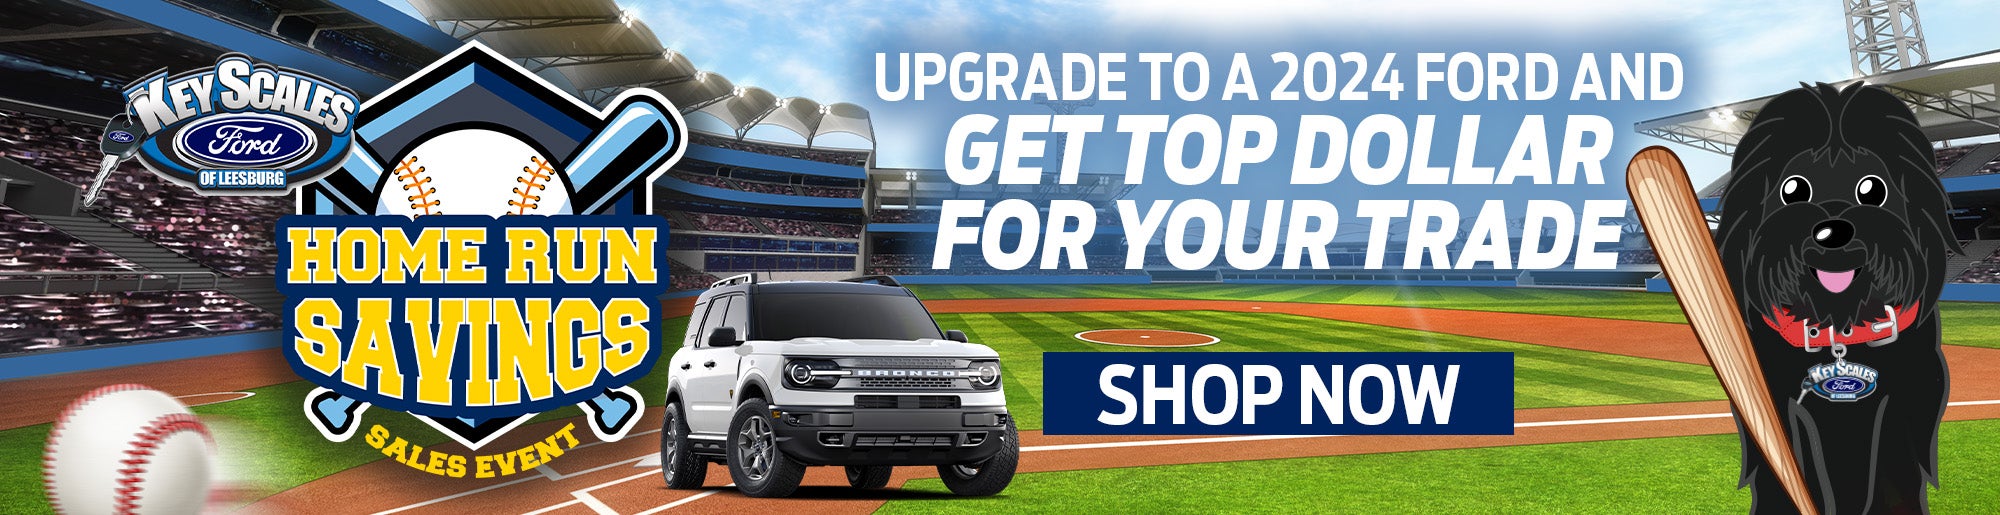 Upgrade To A 2024 Ford And Get Top Dollar For Your Trade